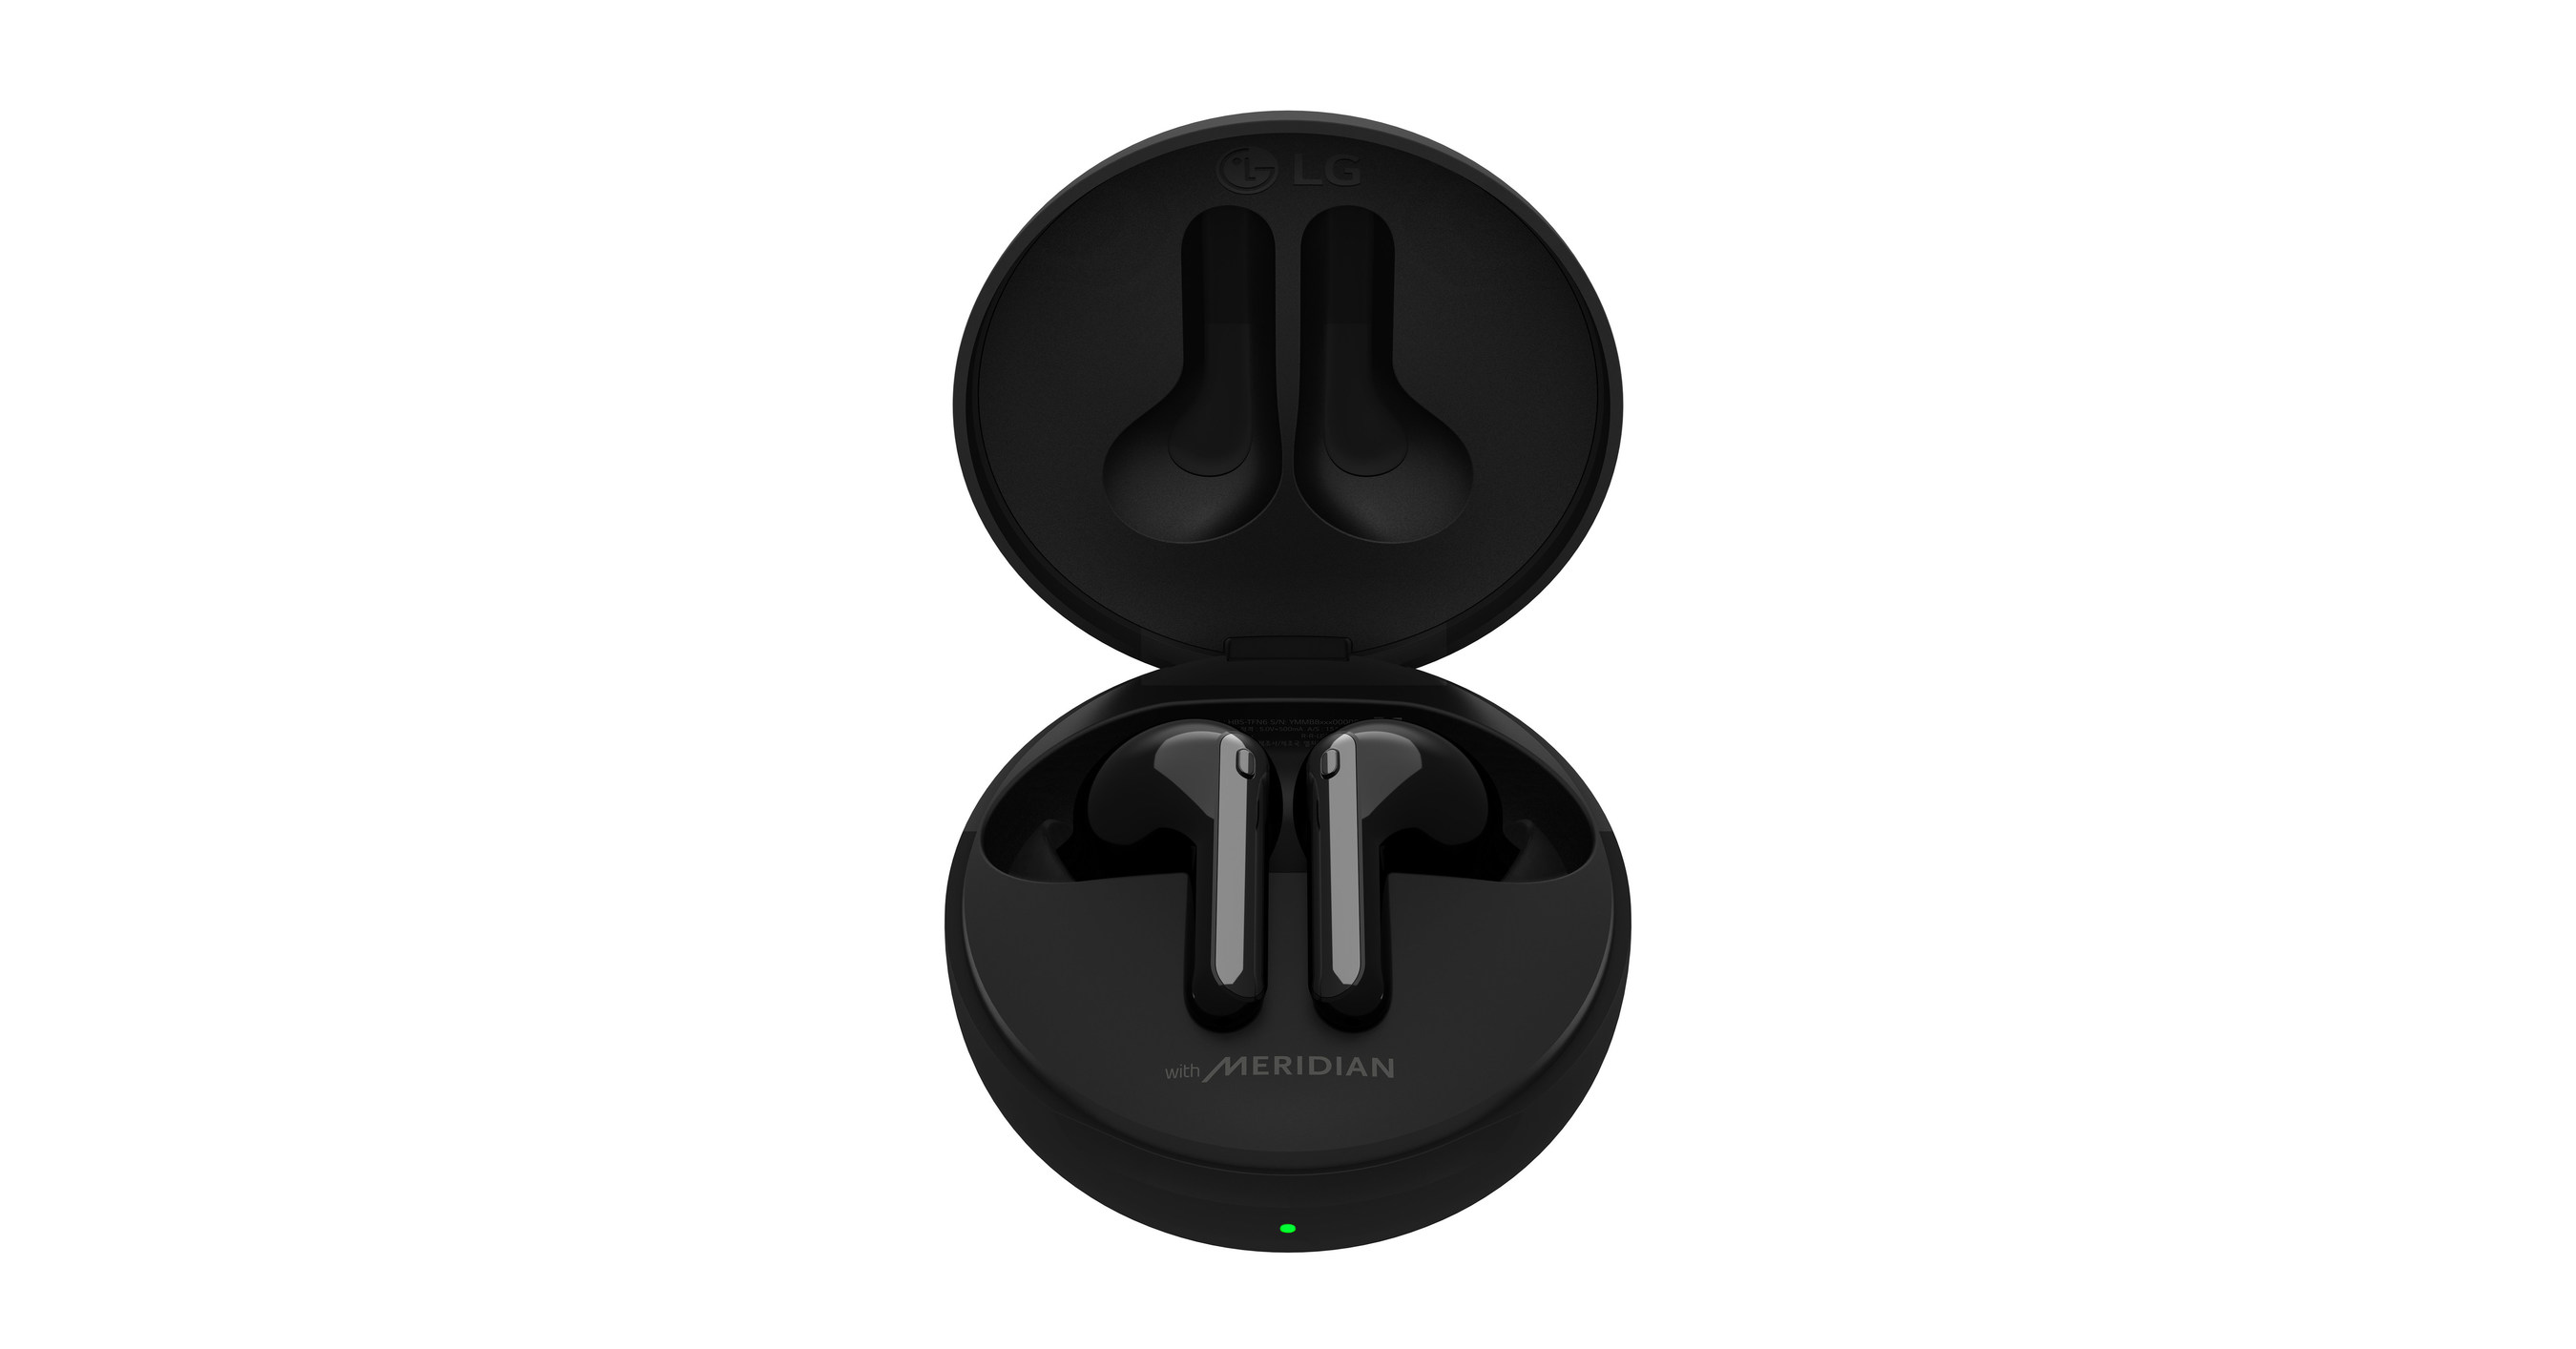 LG US Launches Tone Free True Wireless Earbuds With Active Noise ...